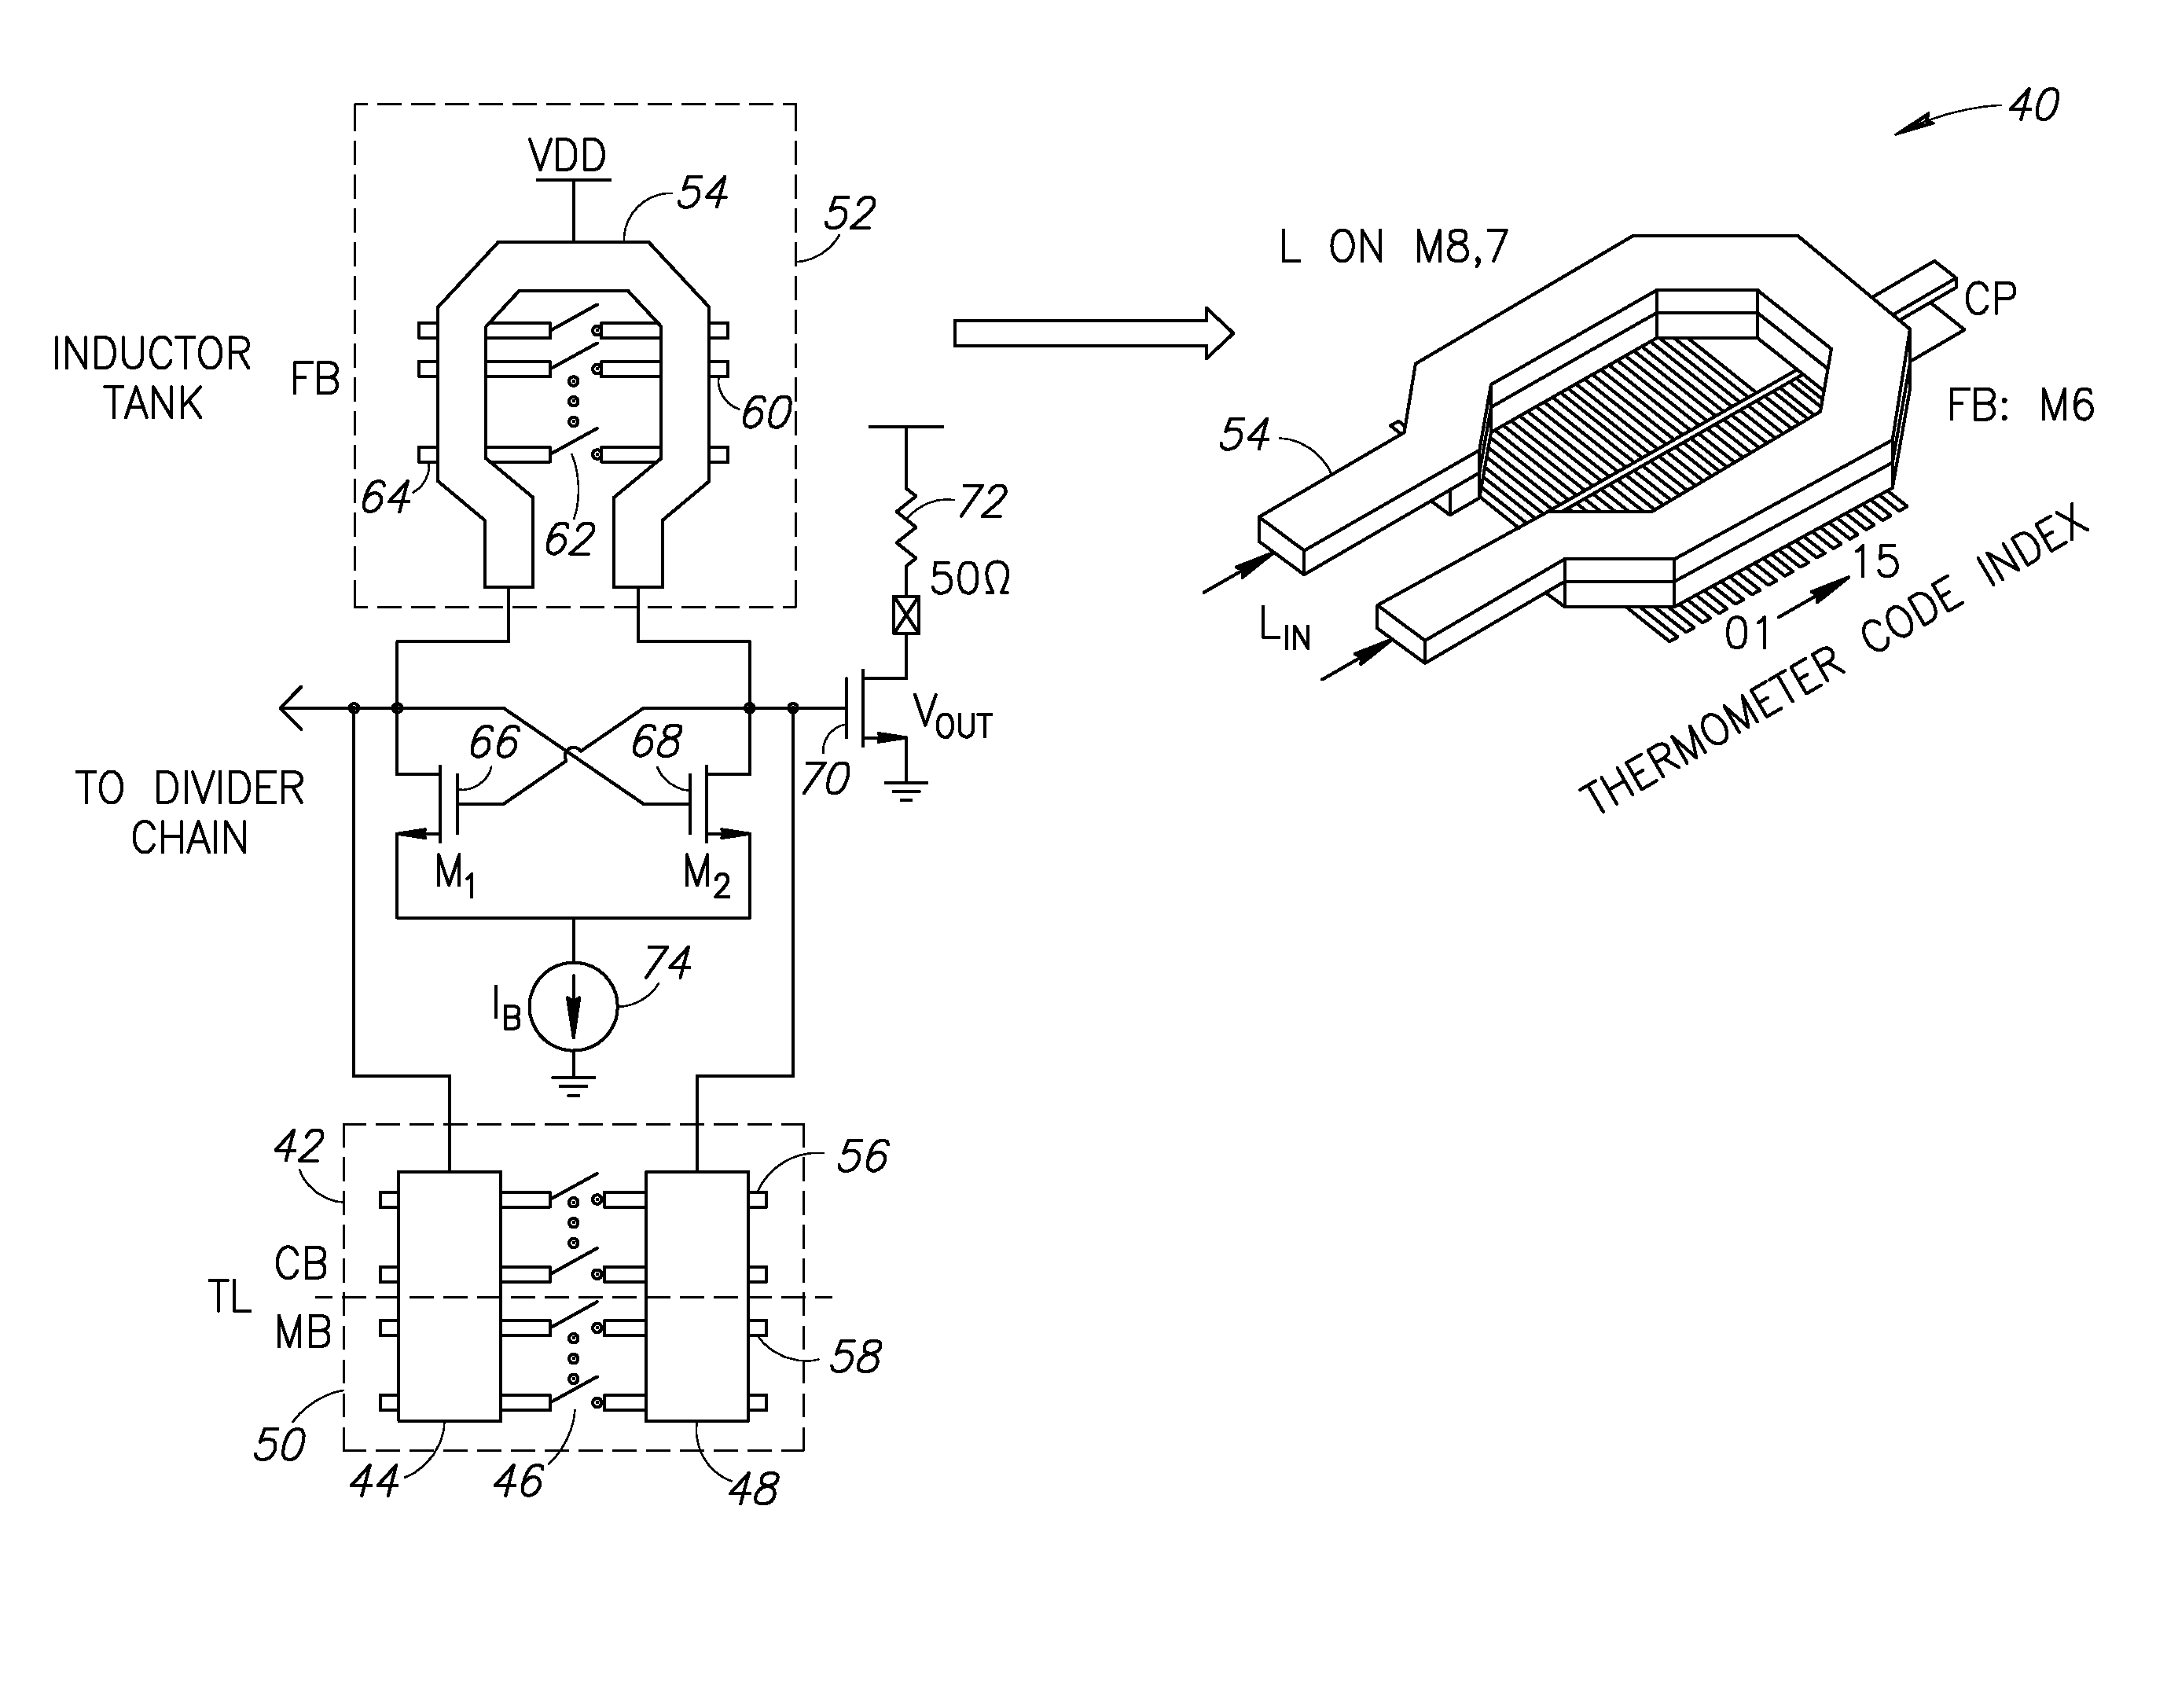 High resolution millimeter wave digitally controlled oscillator with reconfigurable distributed metal capacitor passive resonators